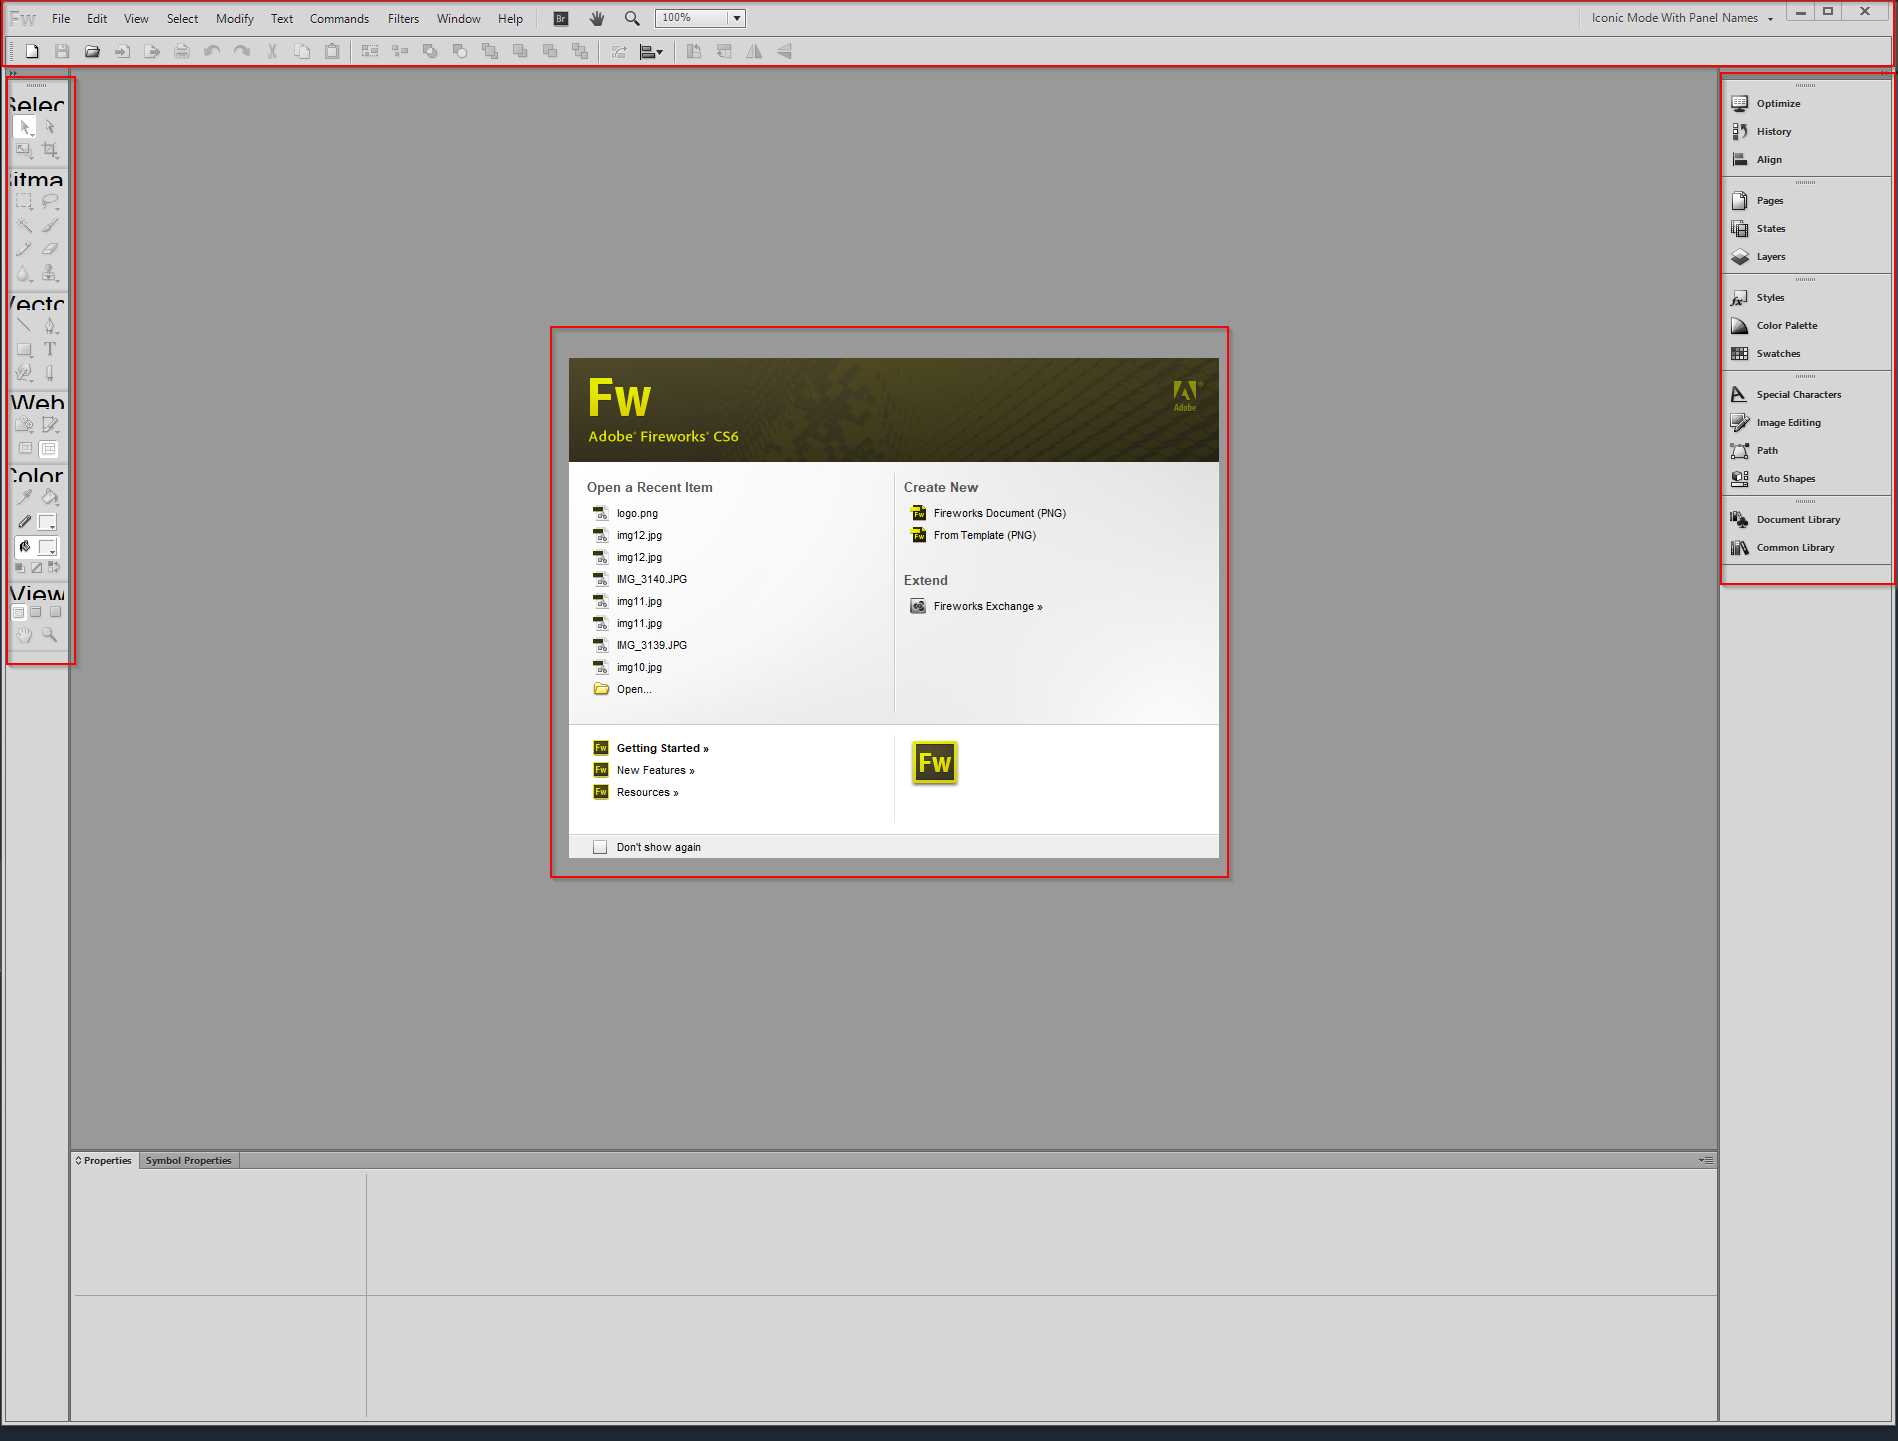 what is adobe fireworks cs6 used for?